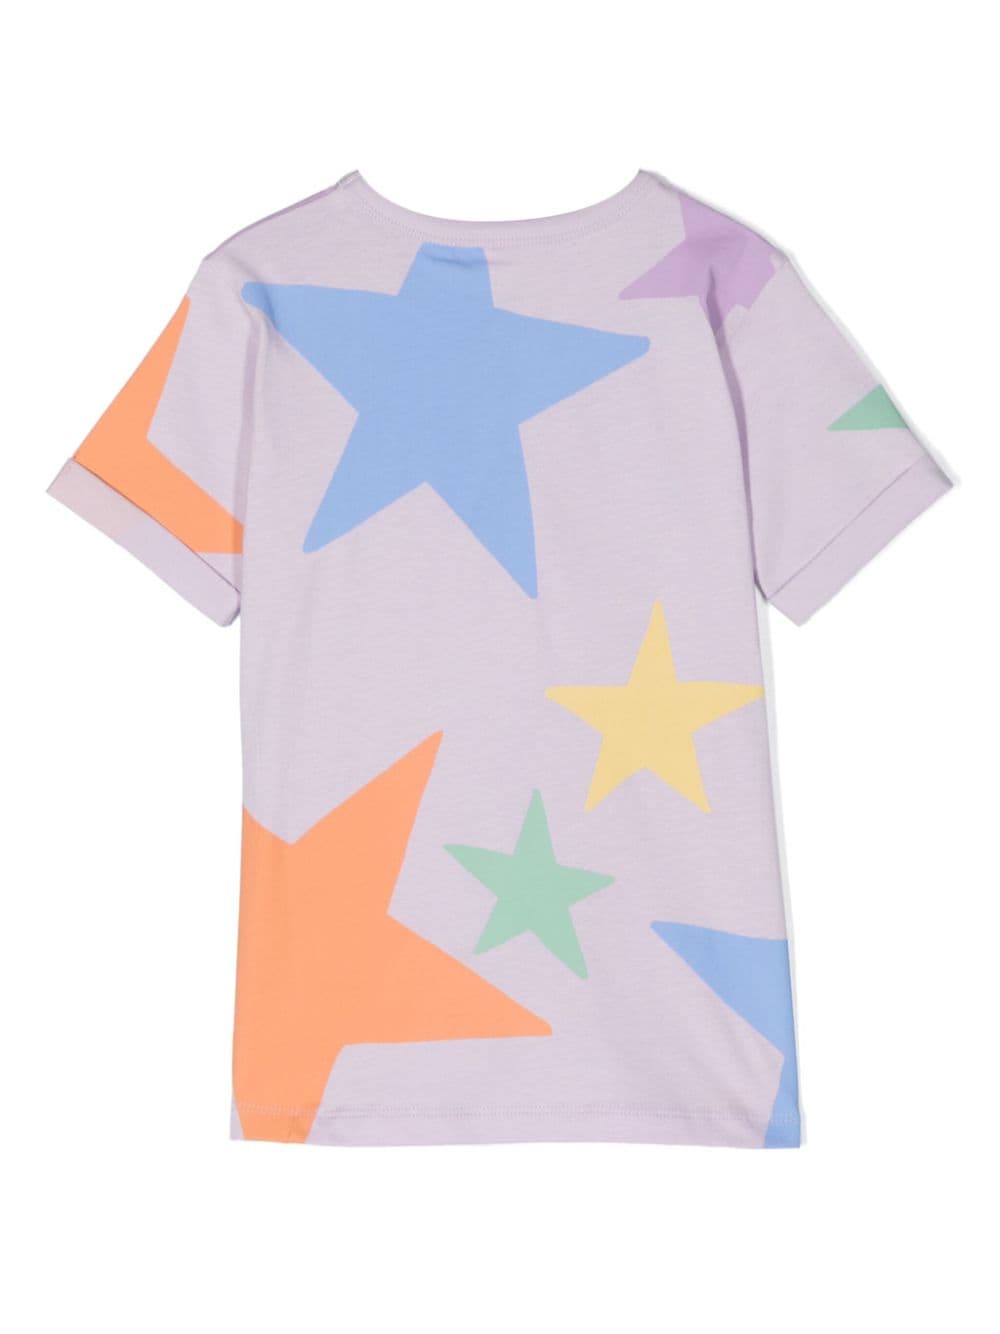 All-over star print t-shirt